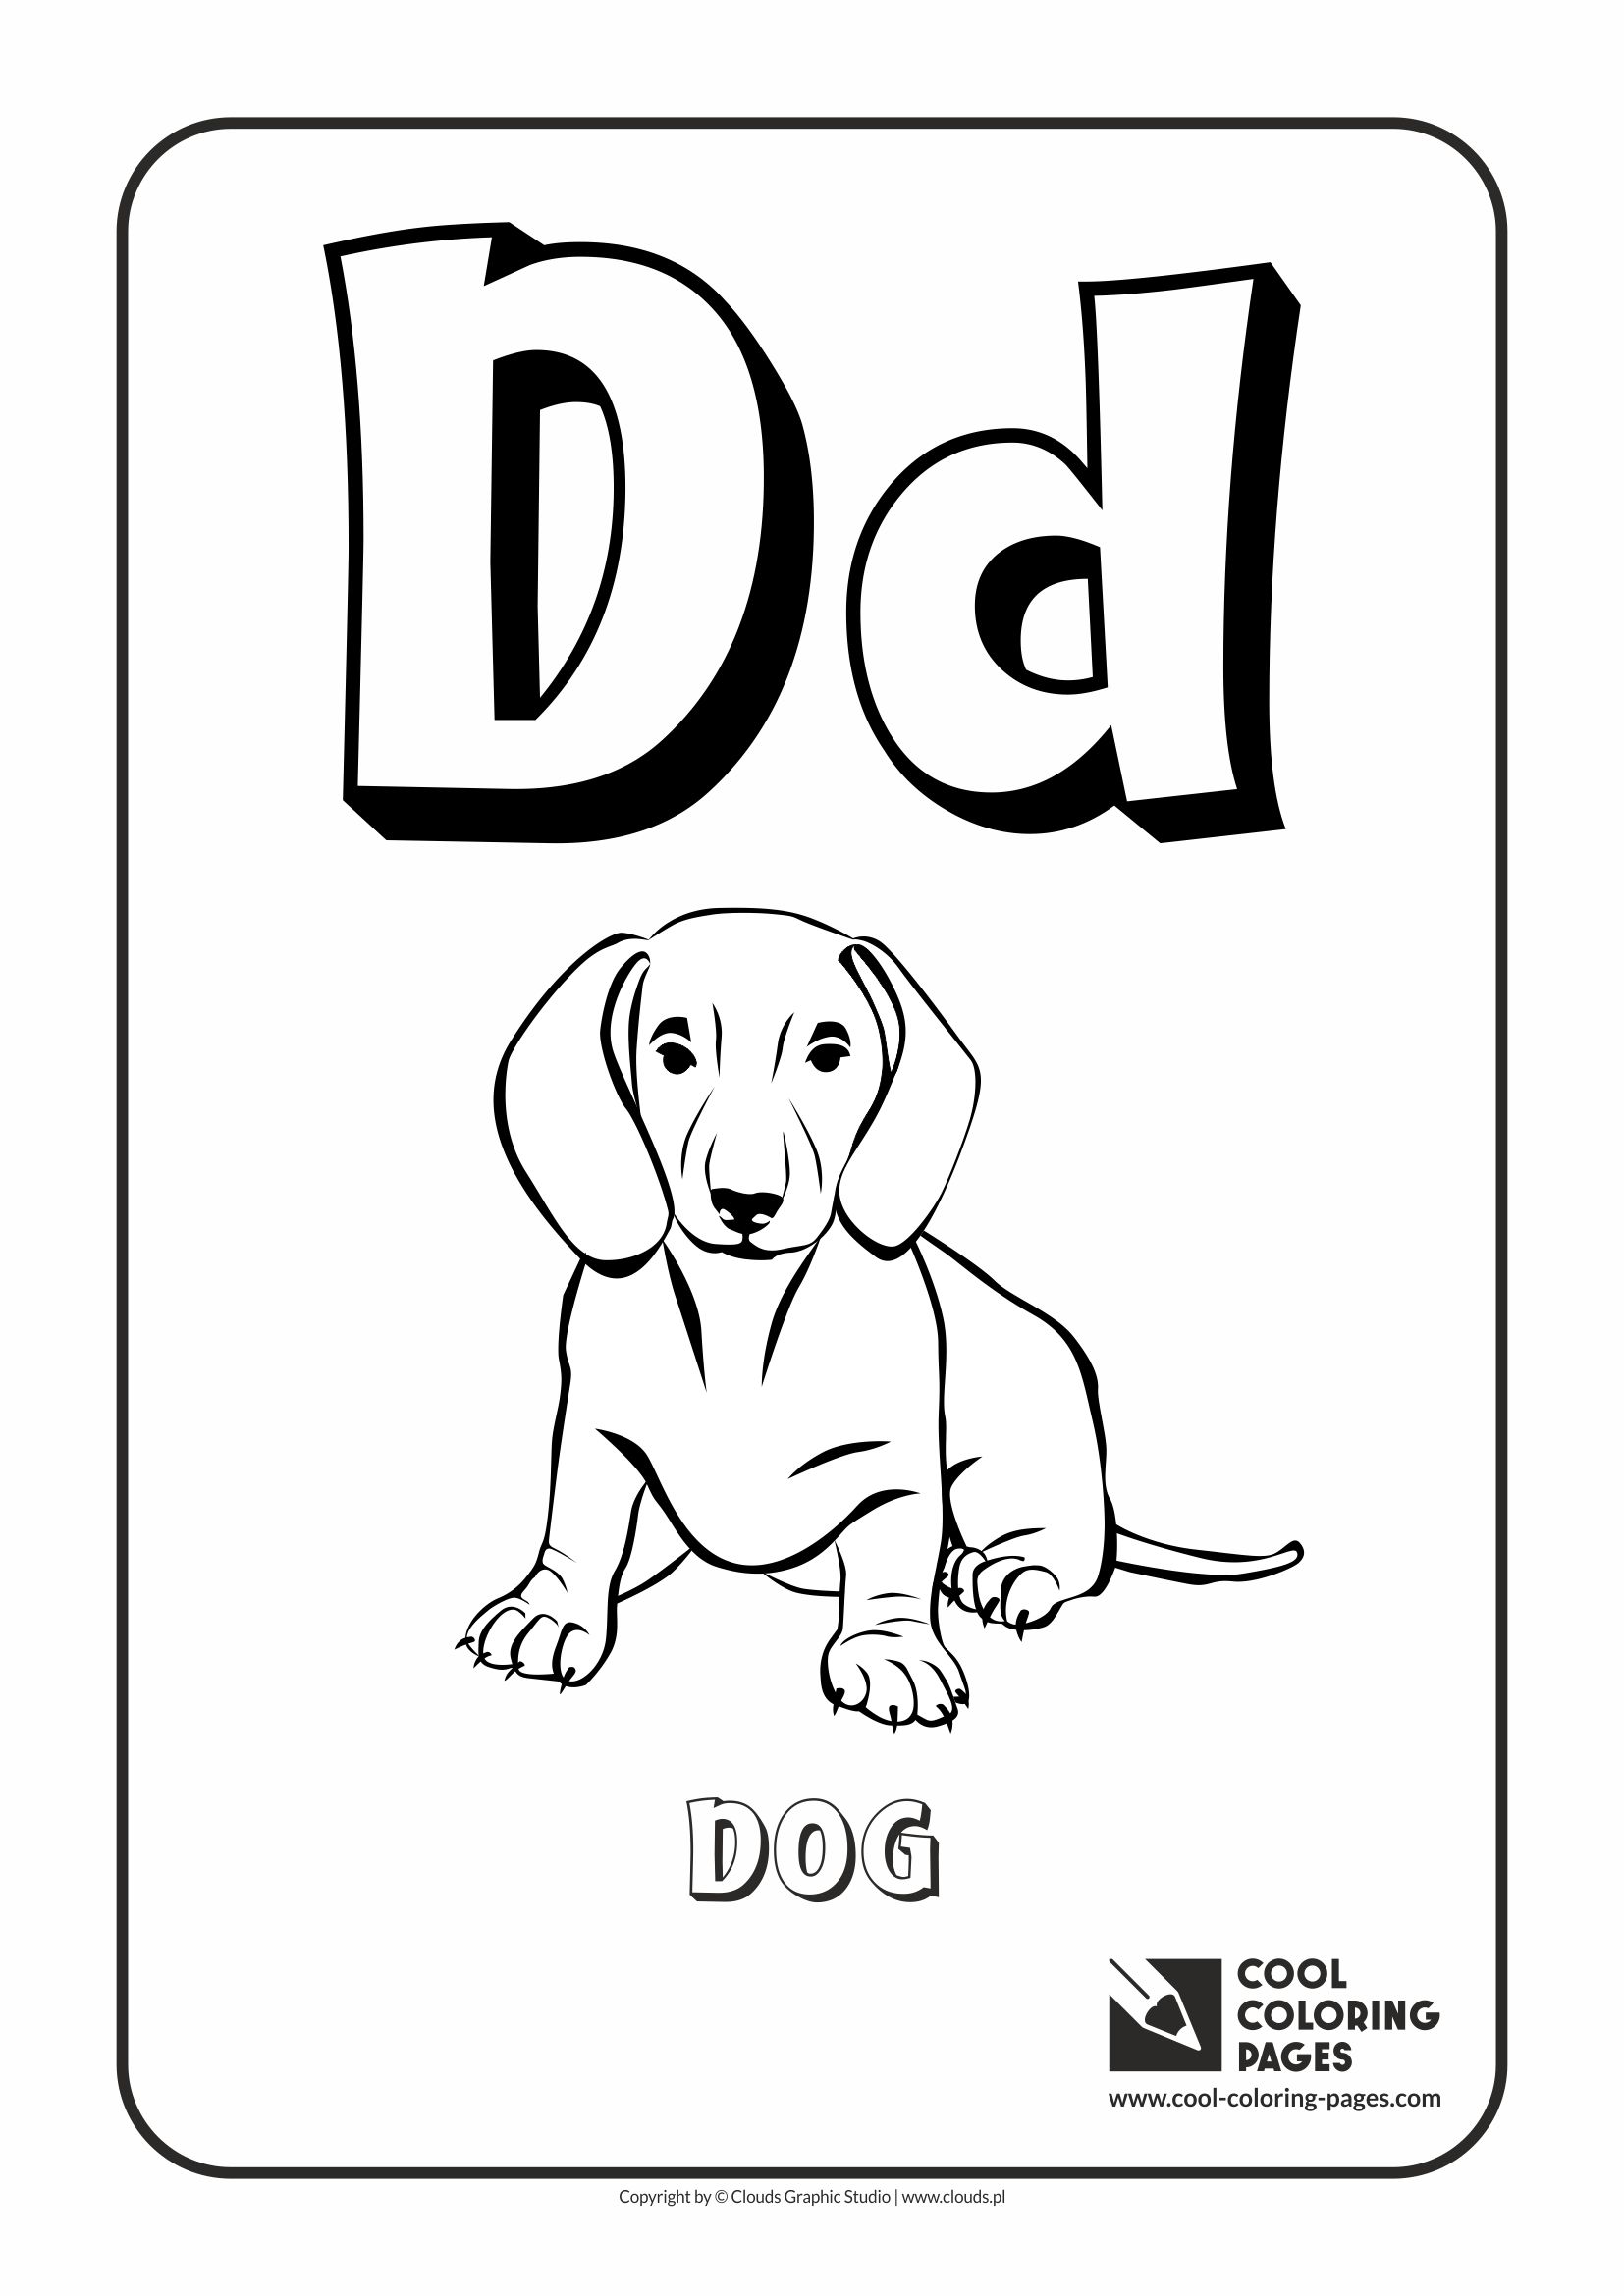 Cool Coloring Pages Alphabet coloring pages - Cool Coloring Pages